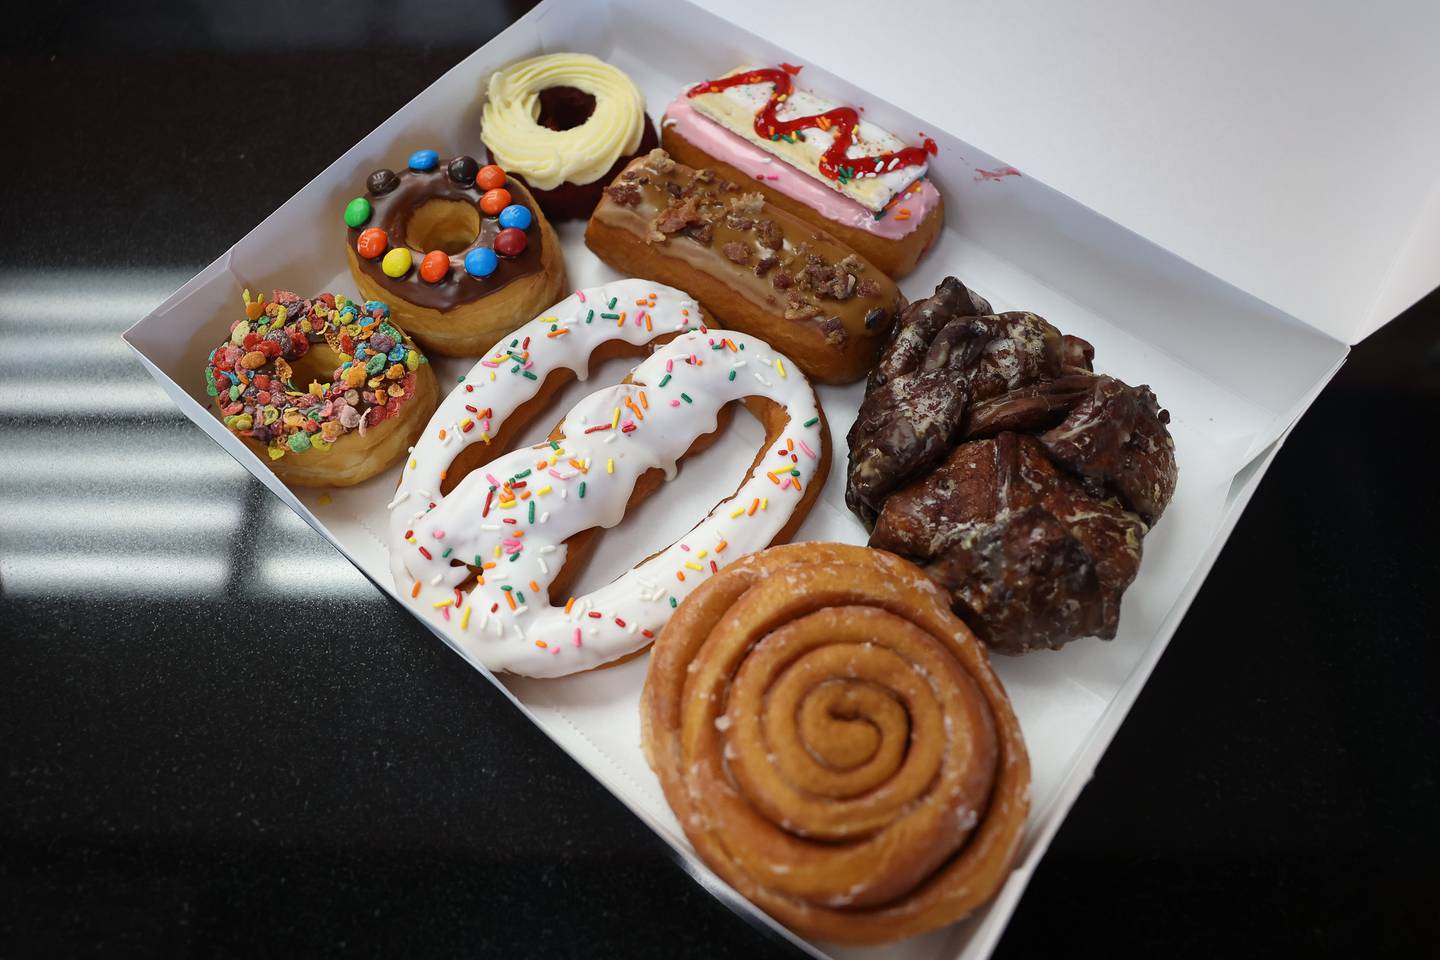 A box is filled with a variety of doughnuts at The Donut Shop on Wednesday, Sept. 13, in Lockport.